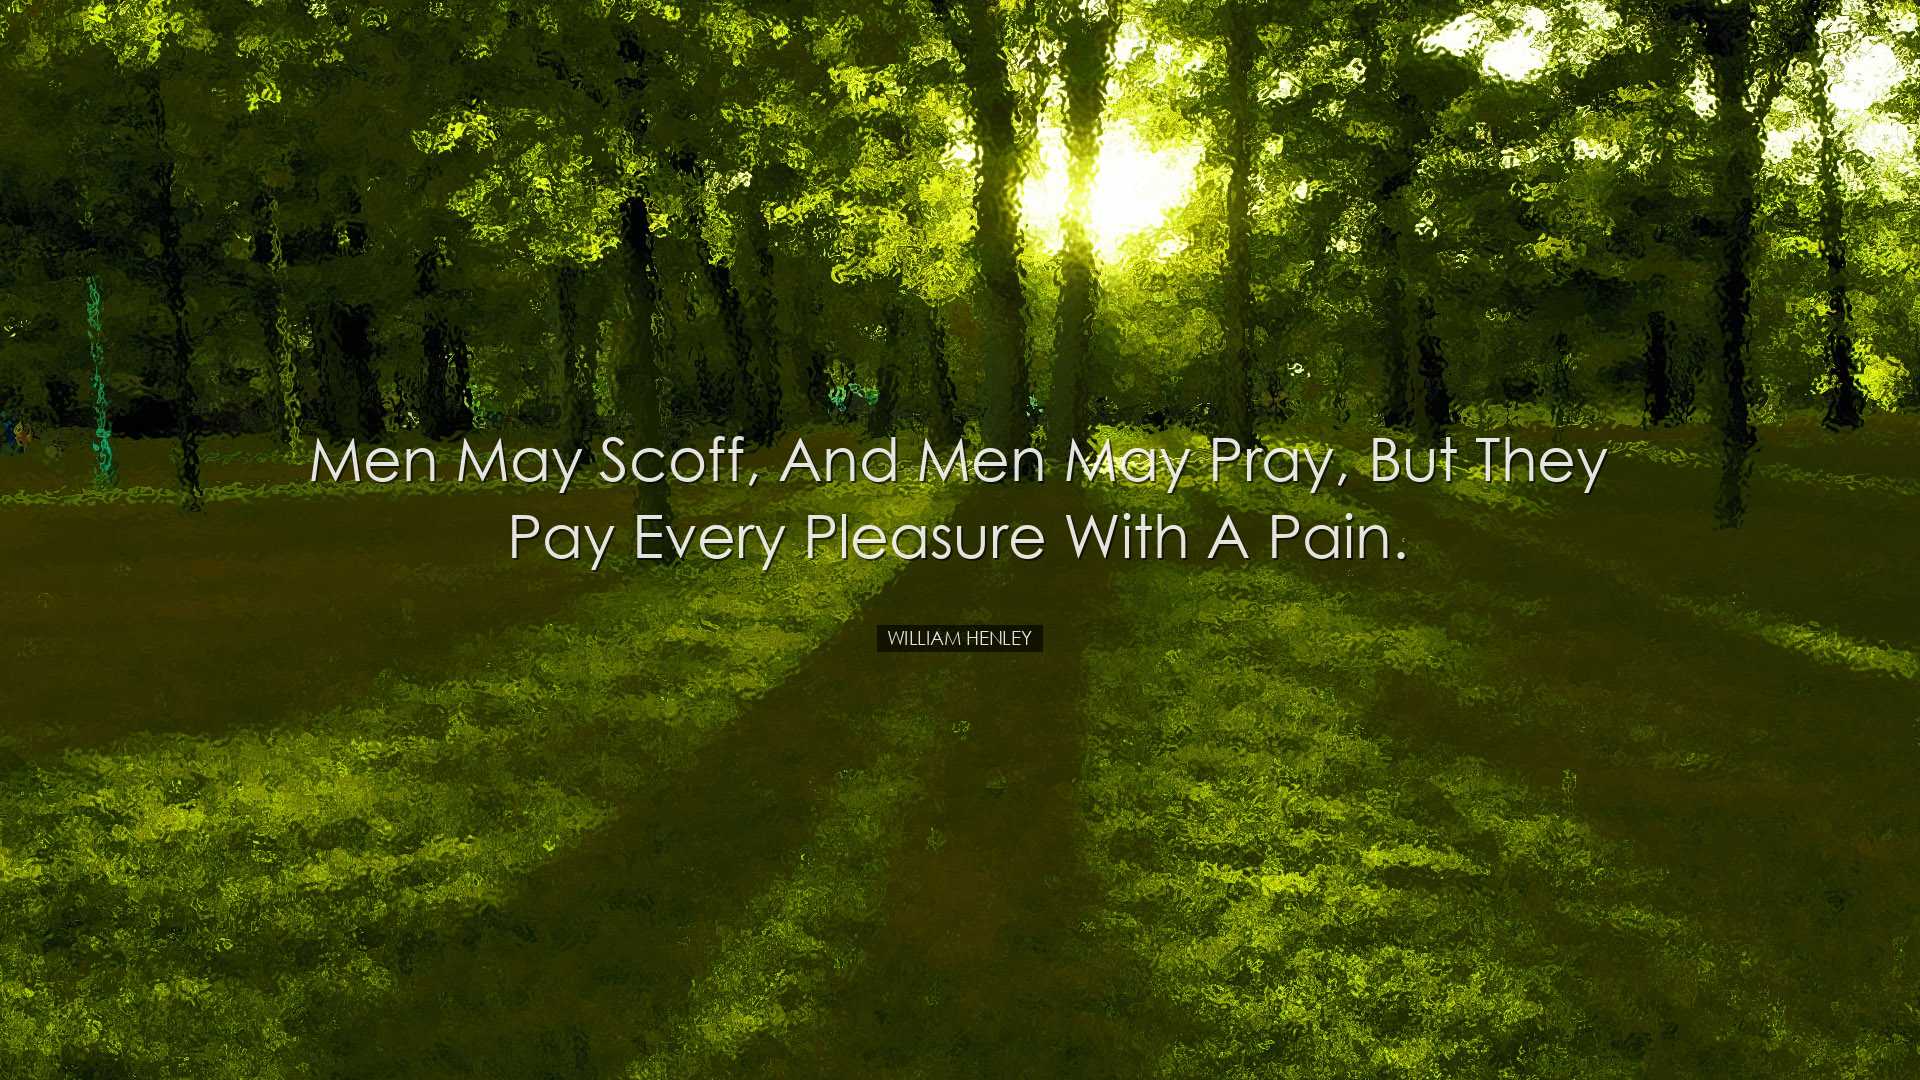 Men may scoff, and men may pray, but they pay every pleasure with